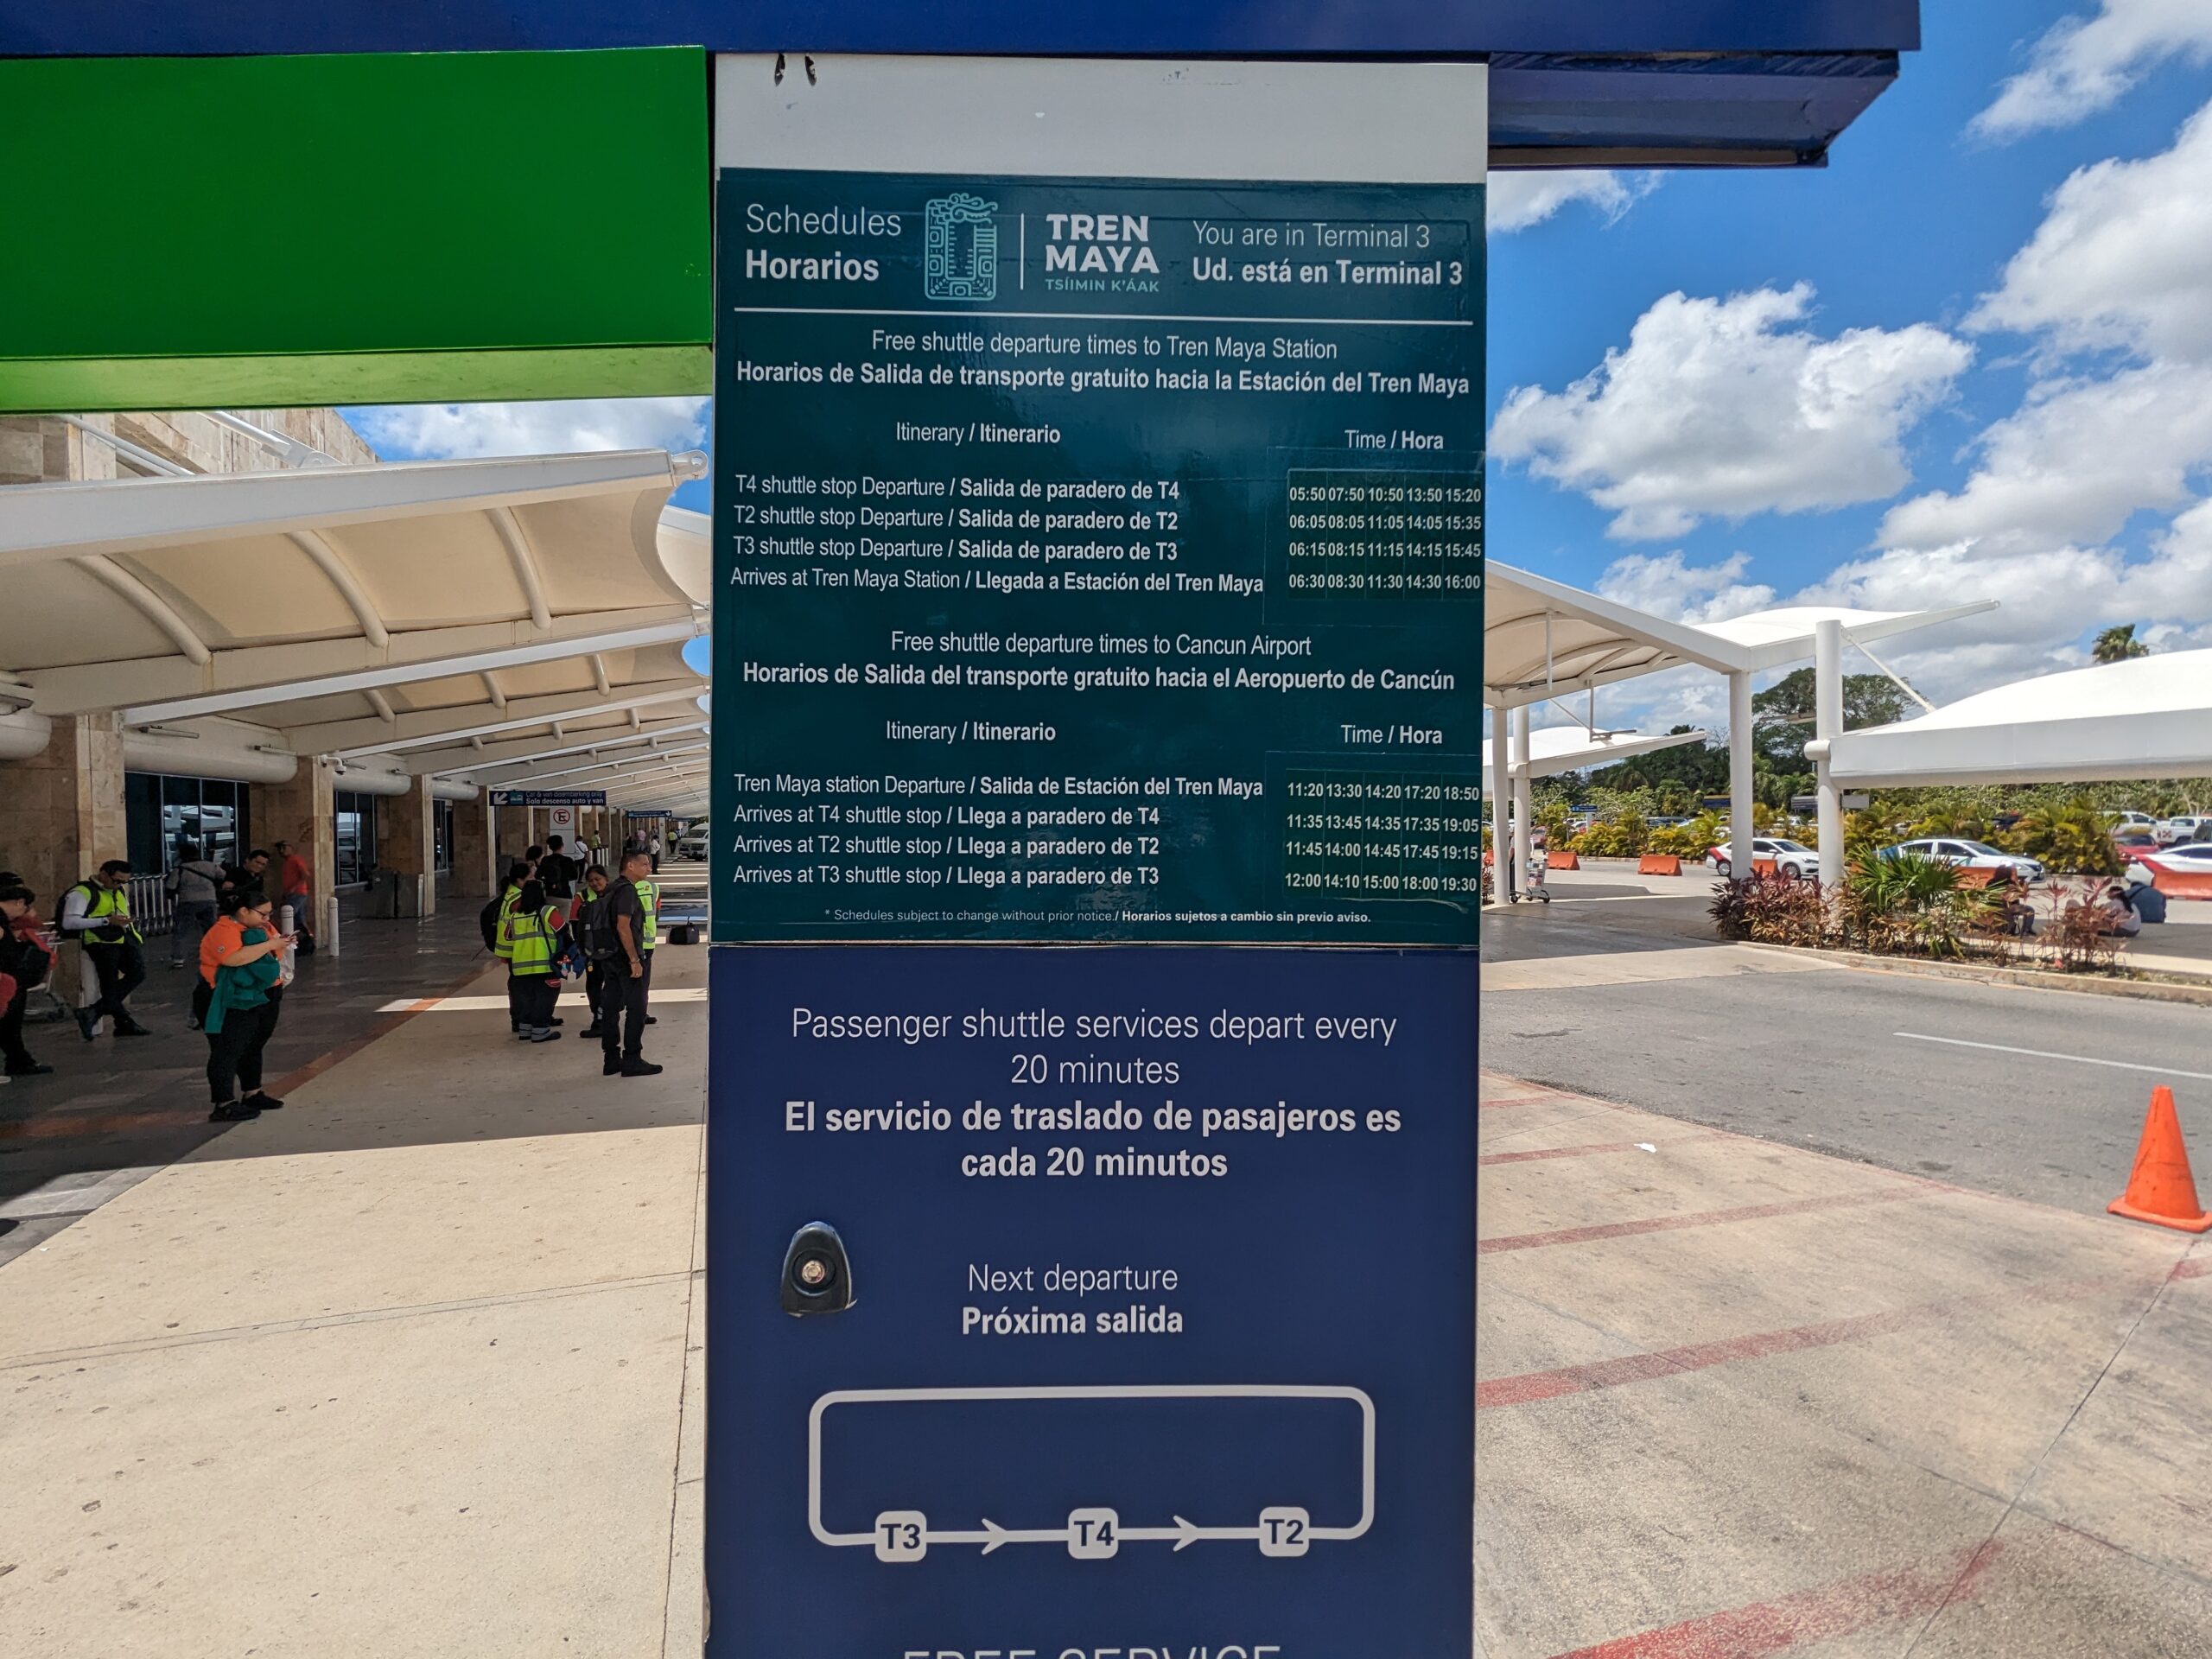 Mayan Train airport shuttle pick up and drop off times